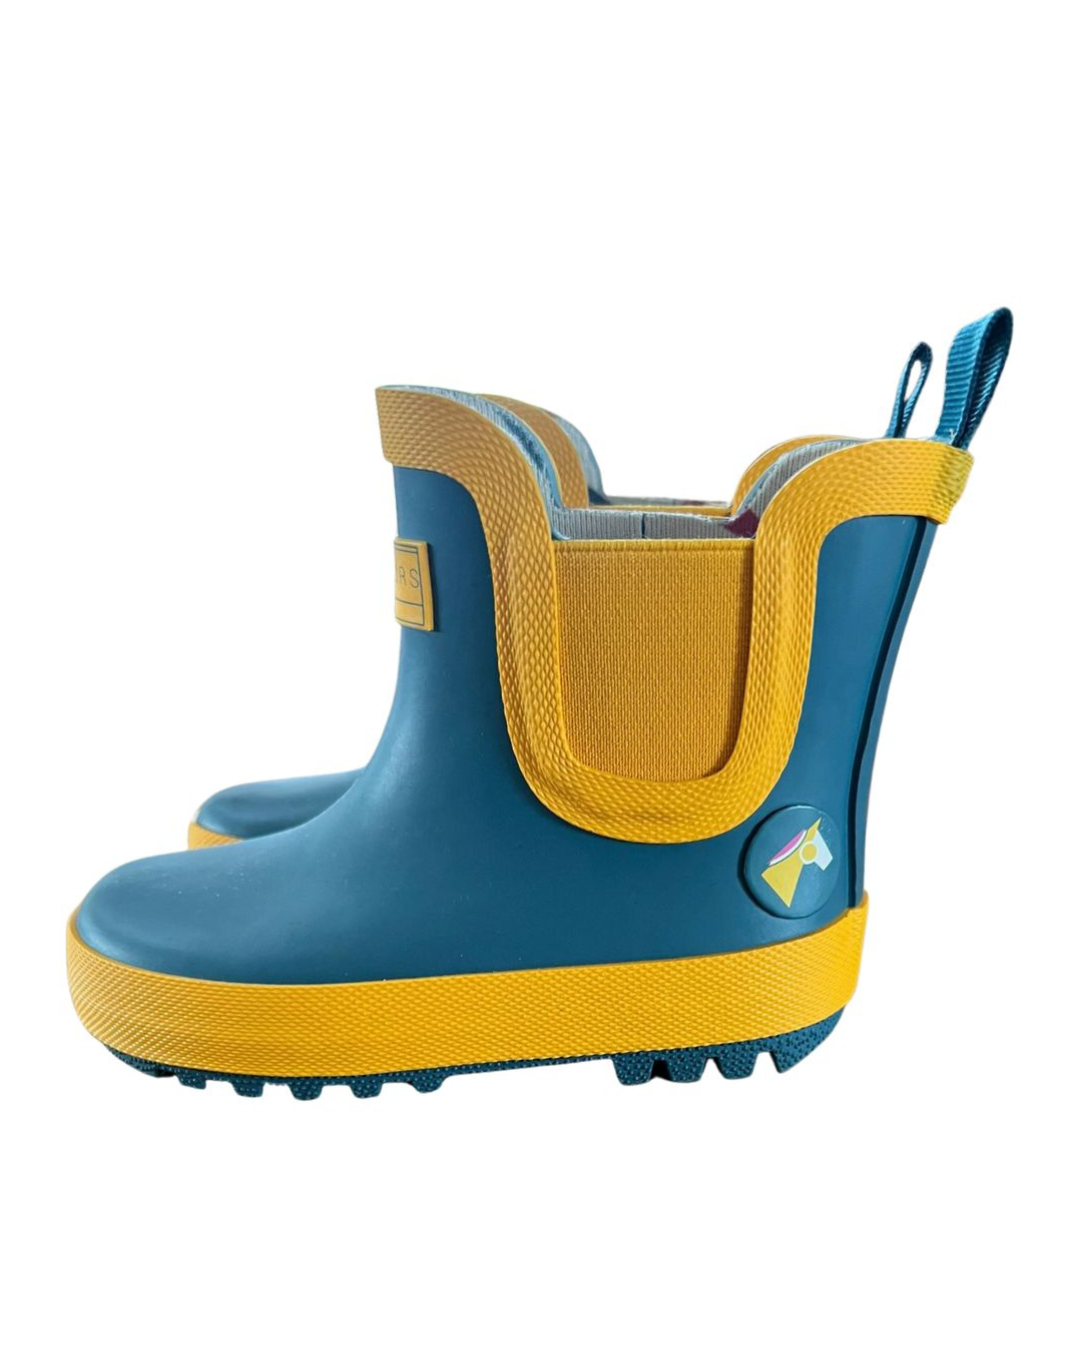 Outlet Blue Todhpurs Welly Boots